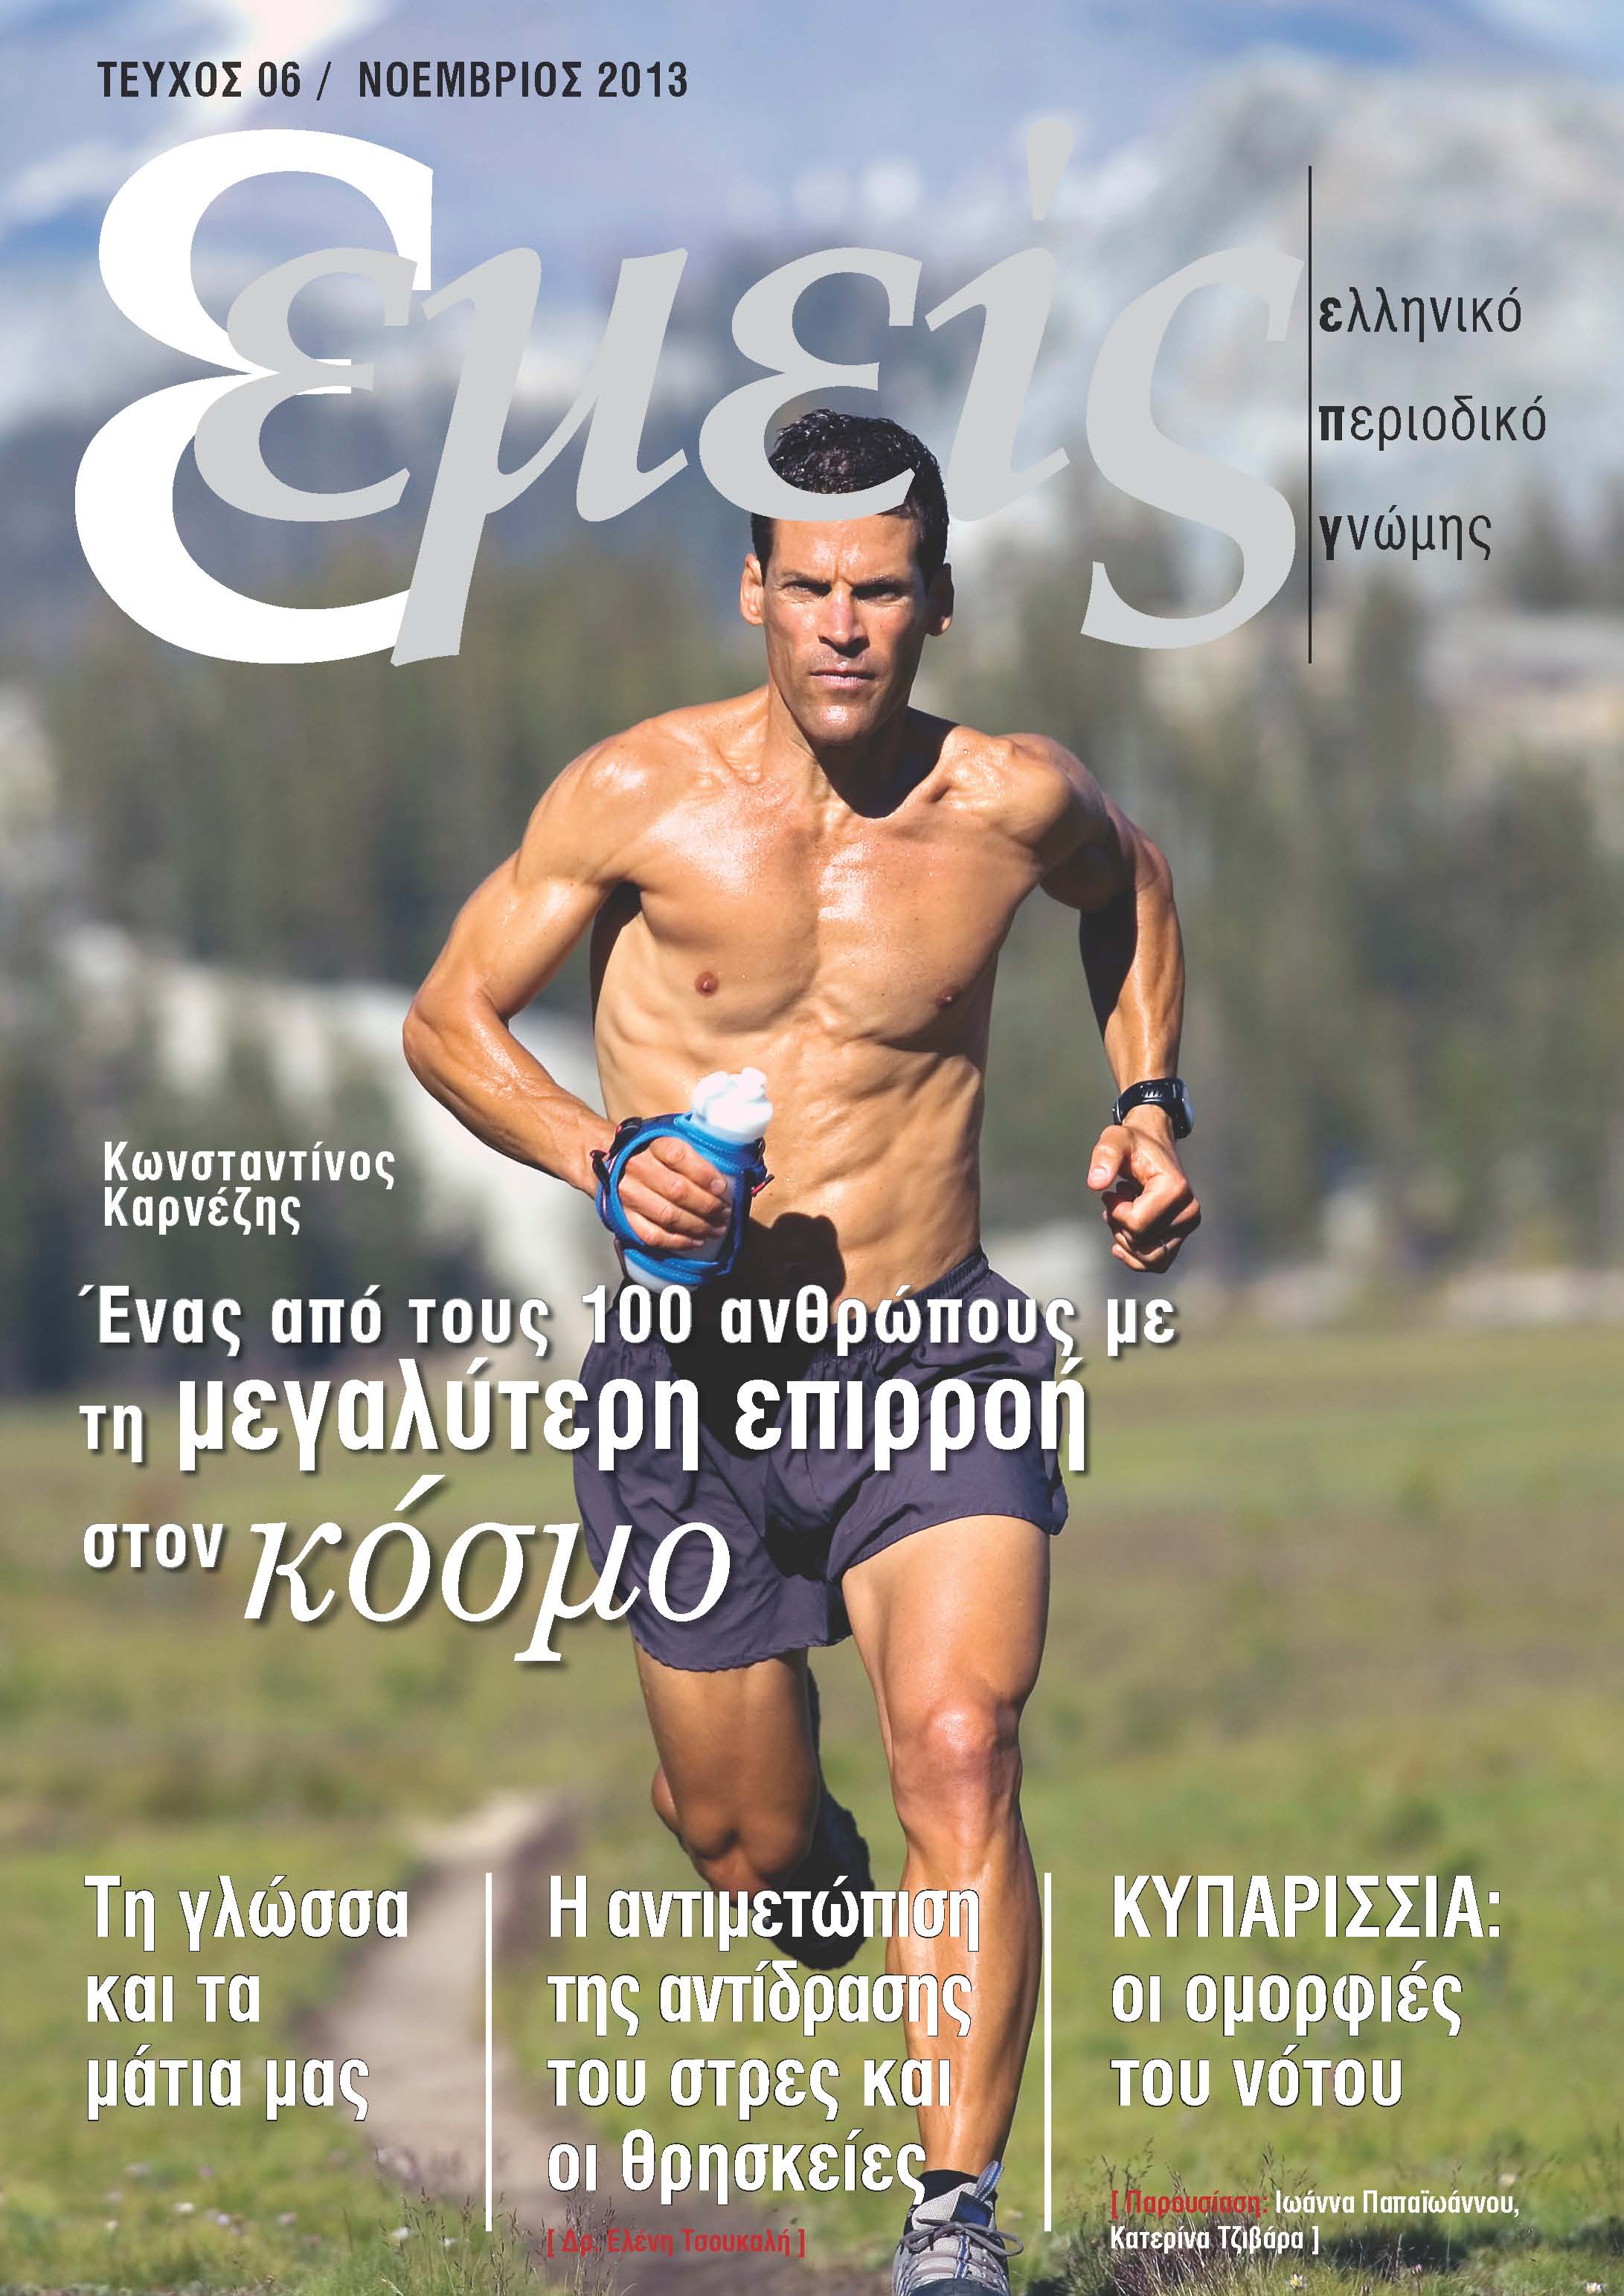 COVER - EMEIS 06